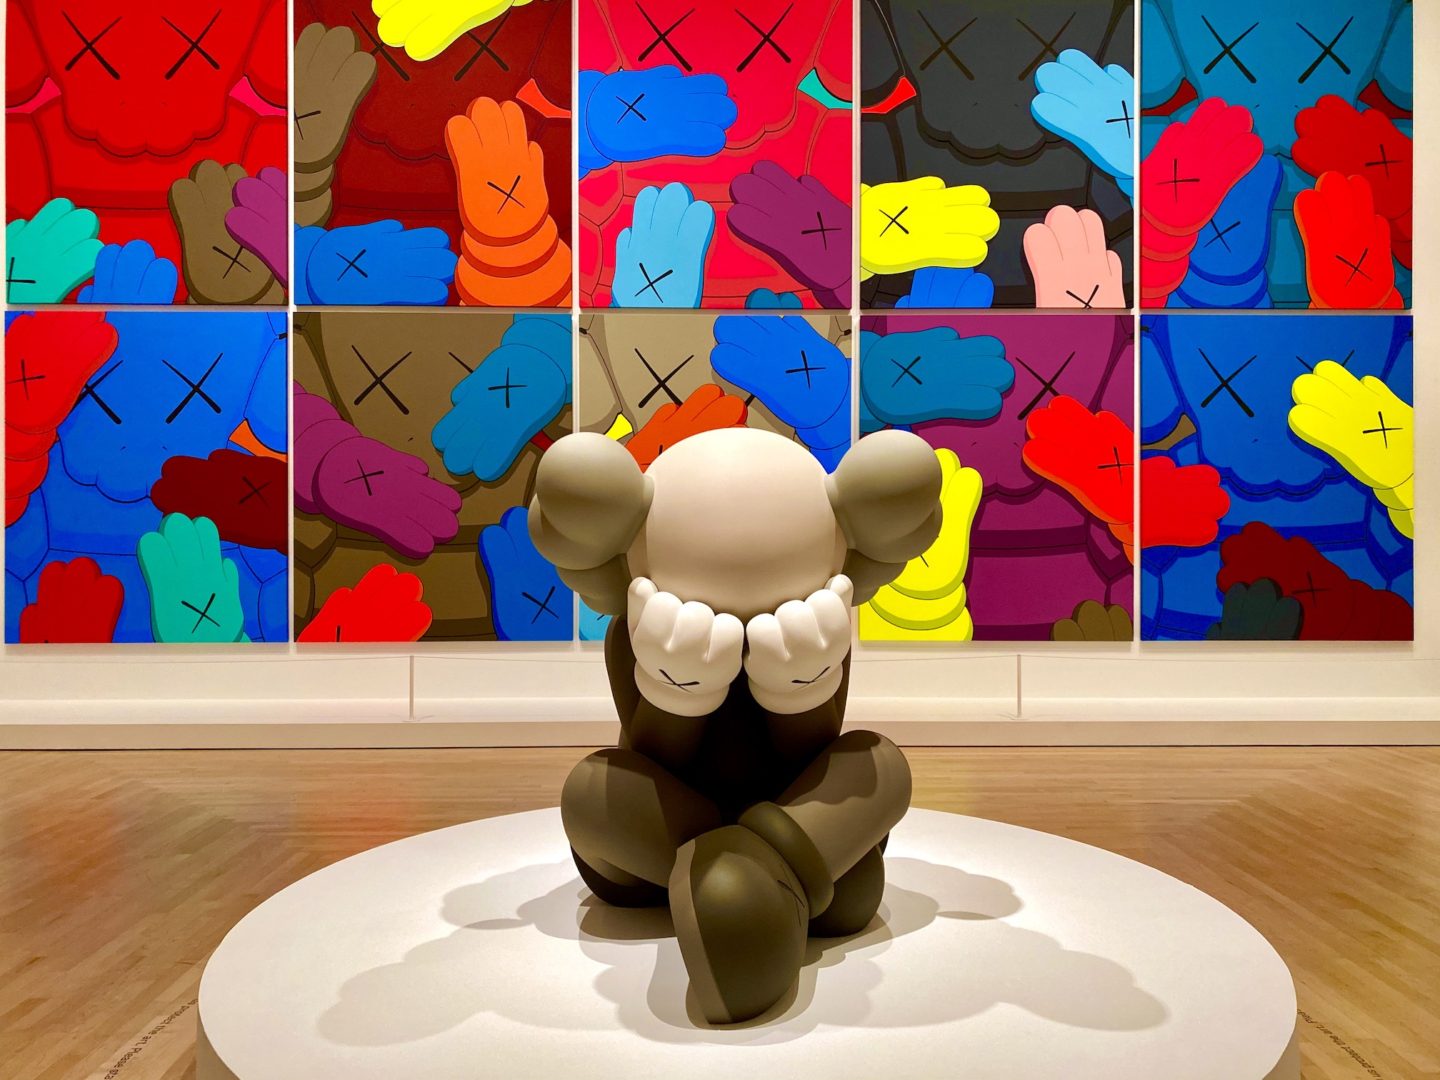 “Kaws: What Party” at The Brooklyn Museum